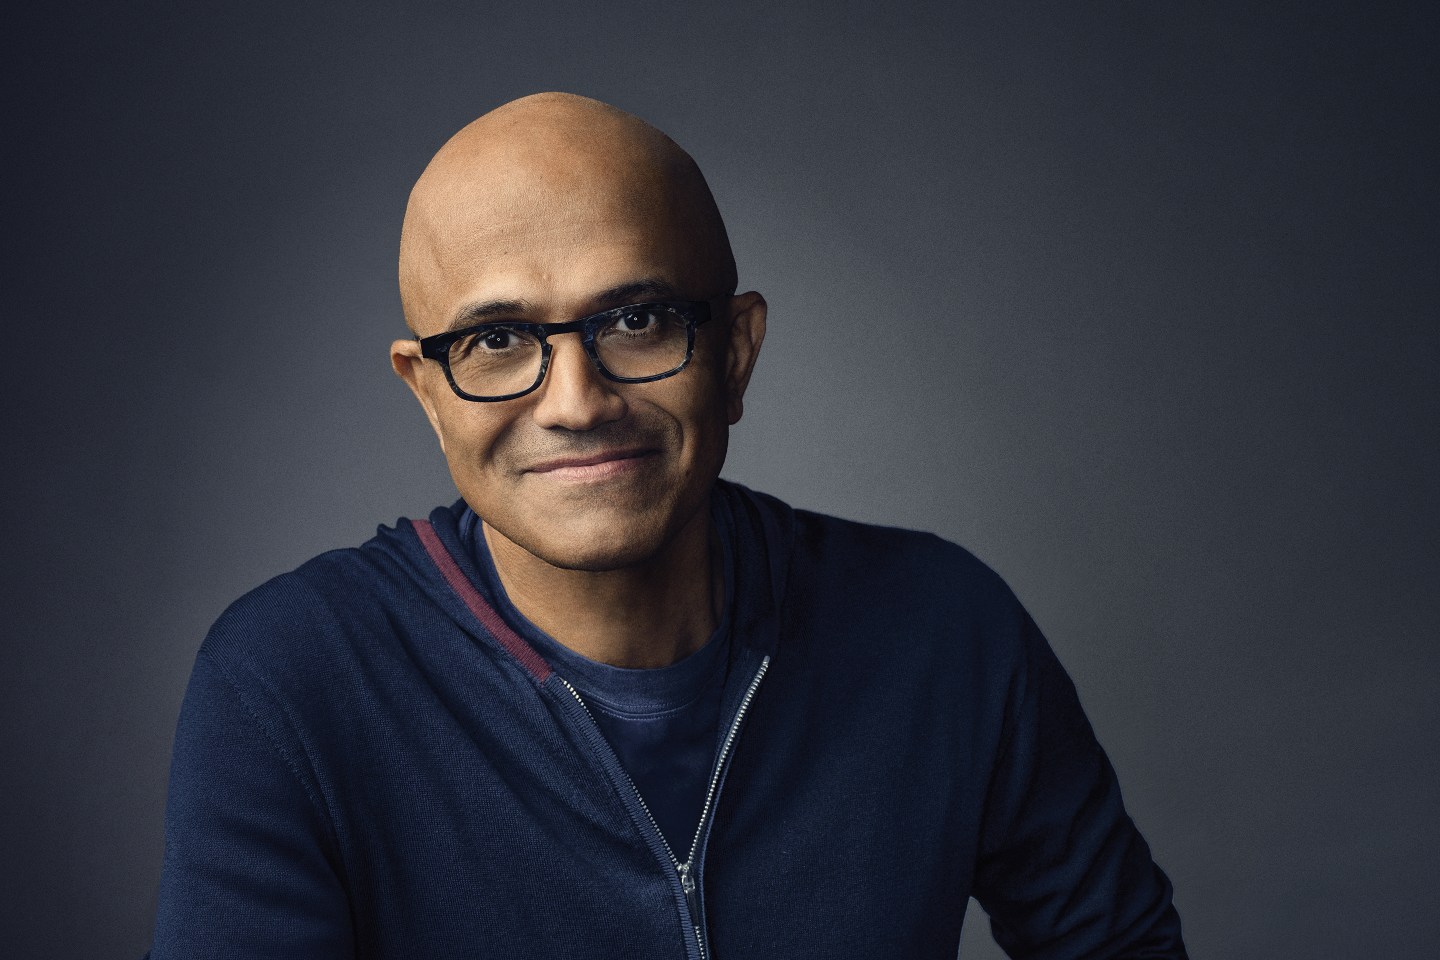 Microsoft CEO and Chairman Satya Nadella photographed at Microsoft HQ, Redmond, WA on May 6th 2024.
Art Streiber for Fortune